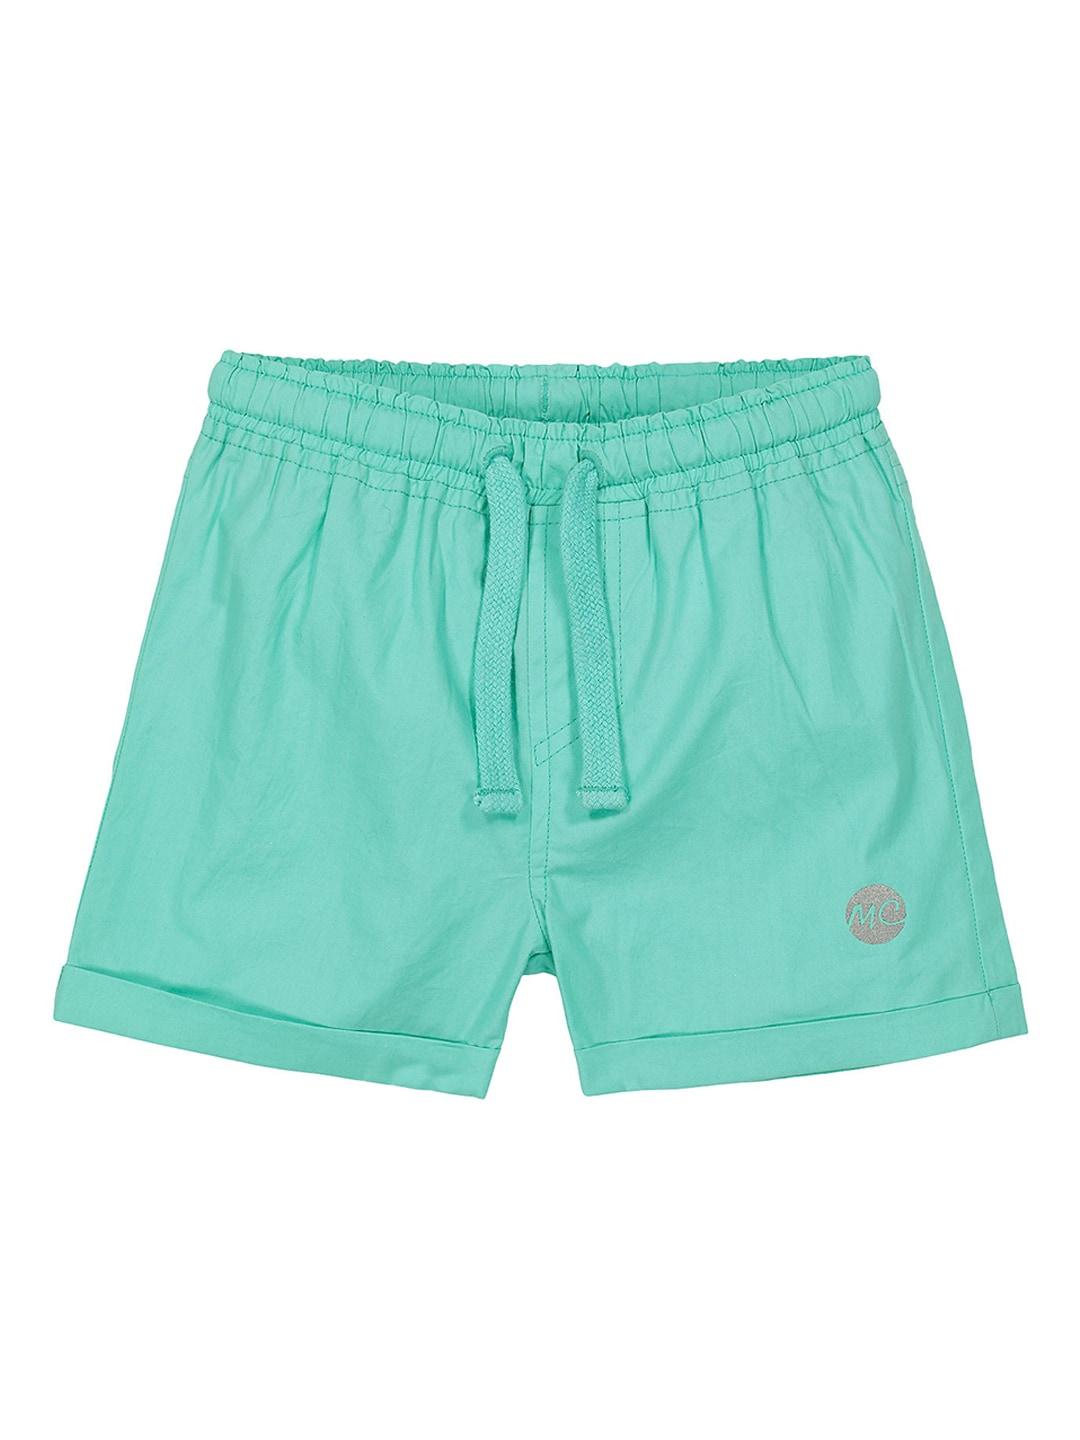 mothercare-boys-solid-mid-rise-shorts